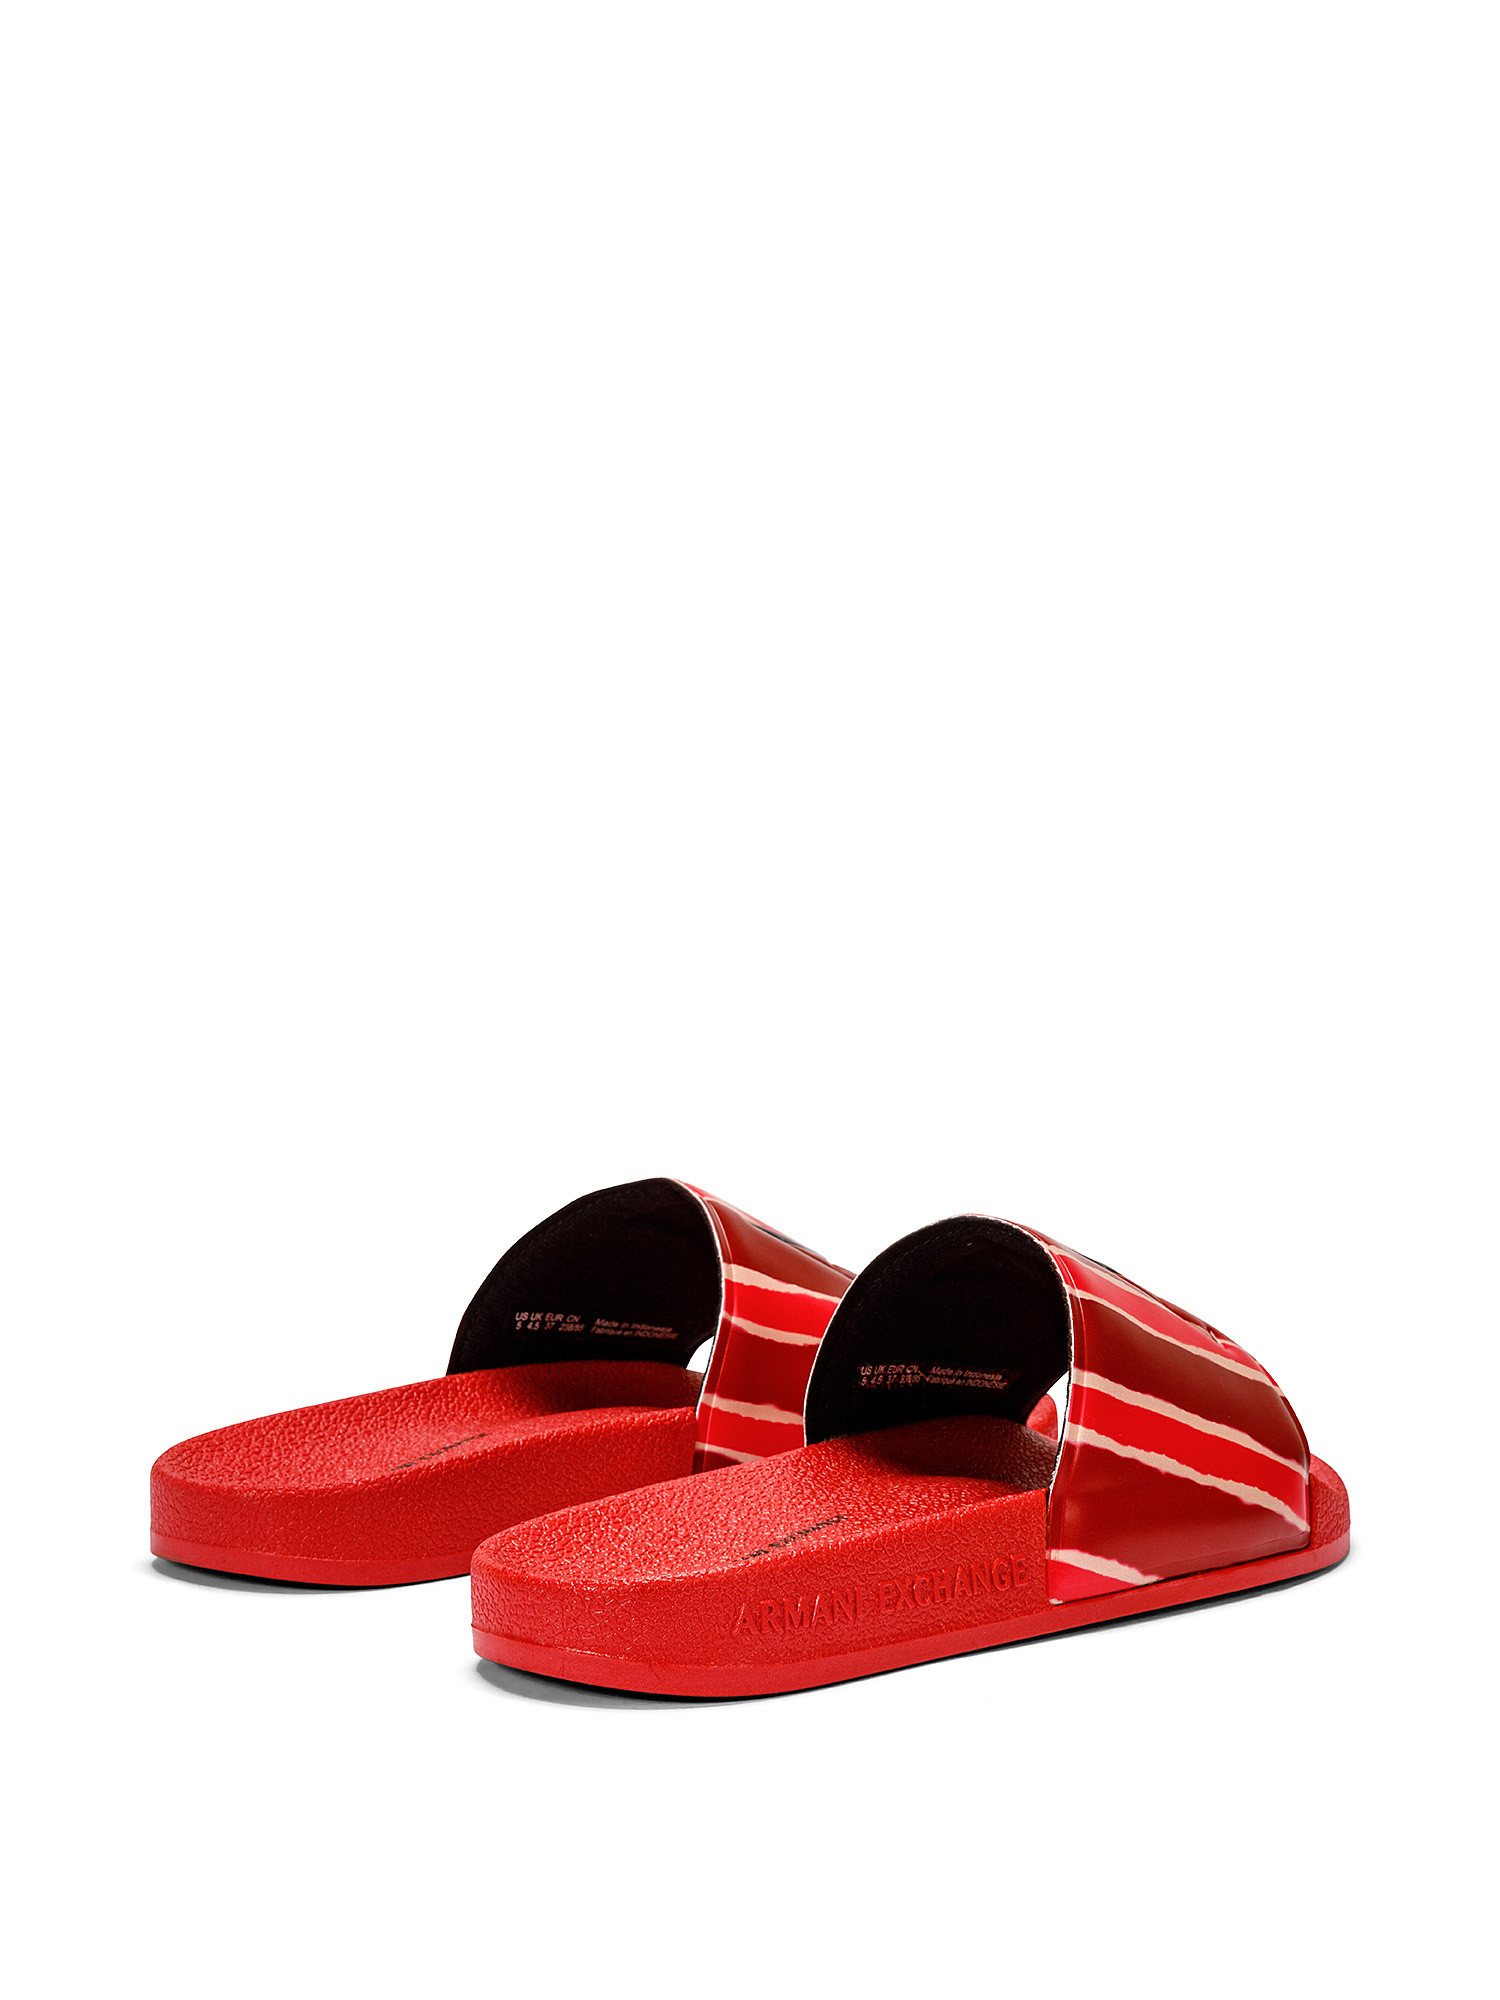 Slippers, Red, large image number 2